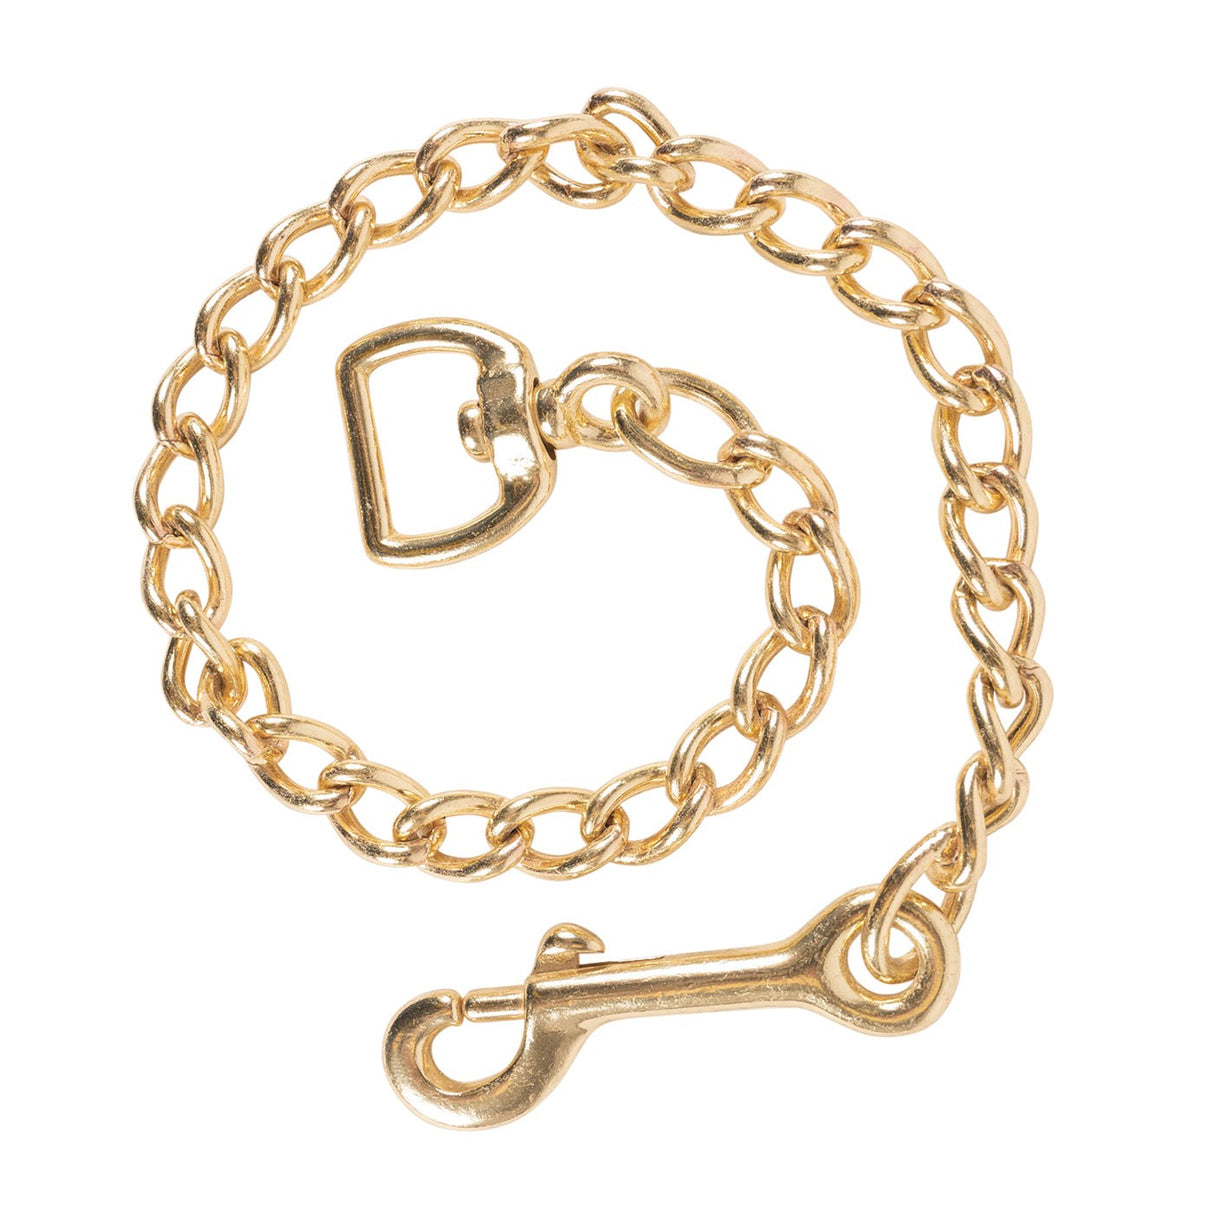 Shedrow Solid Brass Chain 24 In.